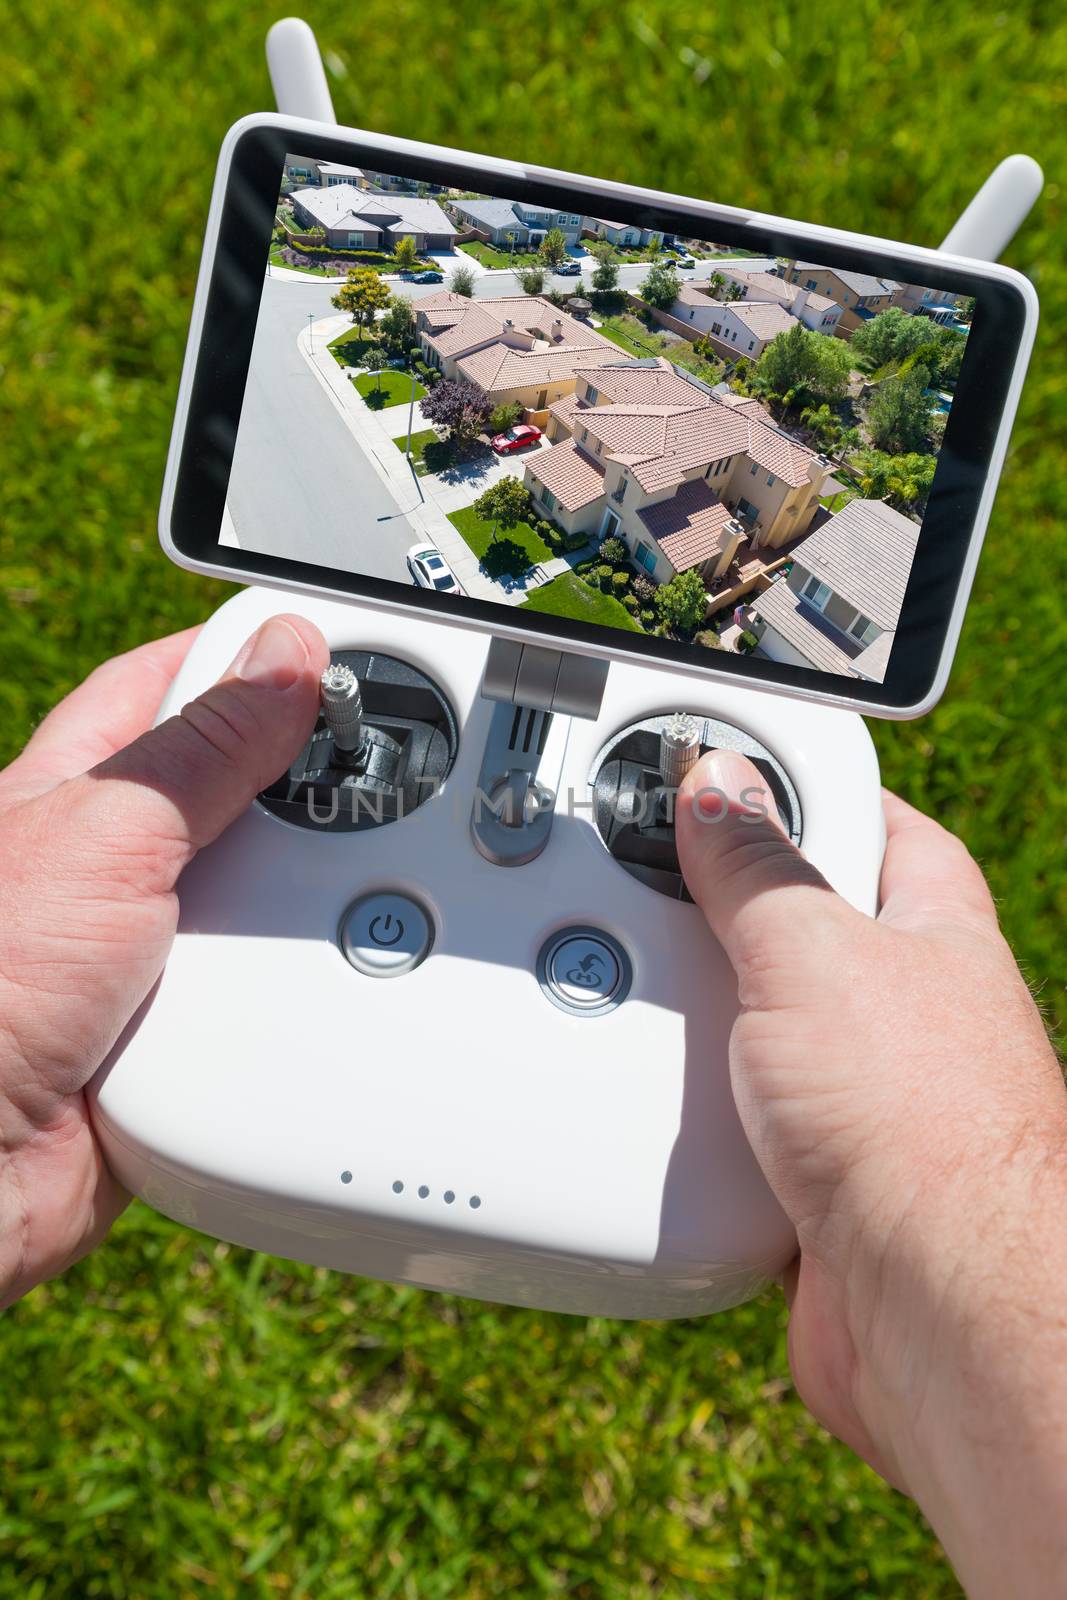 Hands Holding Drone Quadcopter Controller With Residential Homes on Screen.